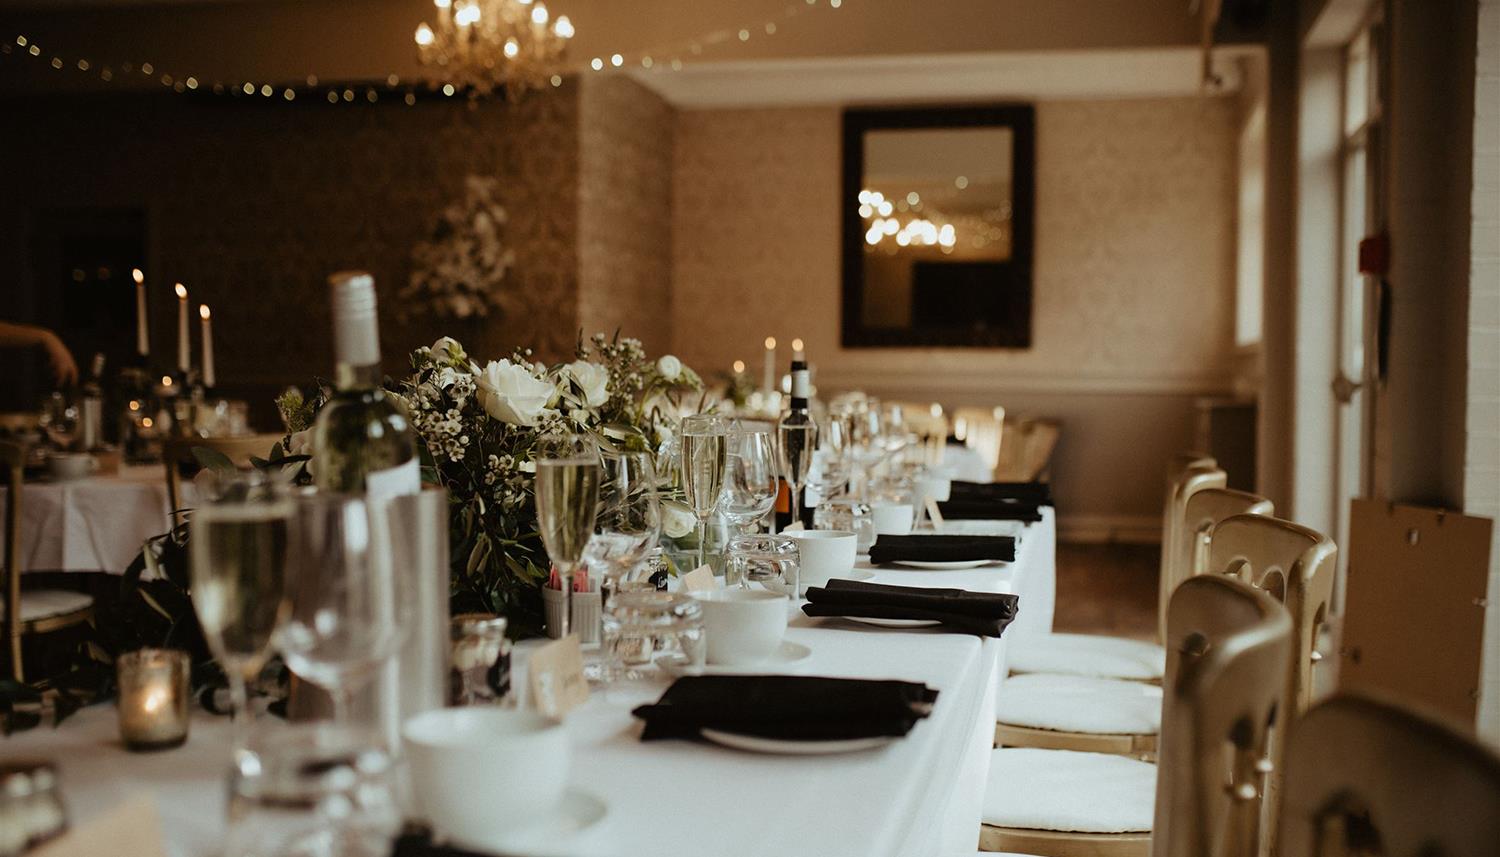 Table decorated. Photo Credit: E&O Photography